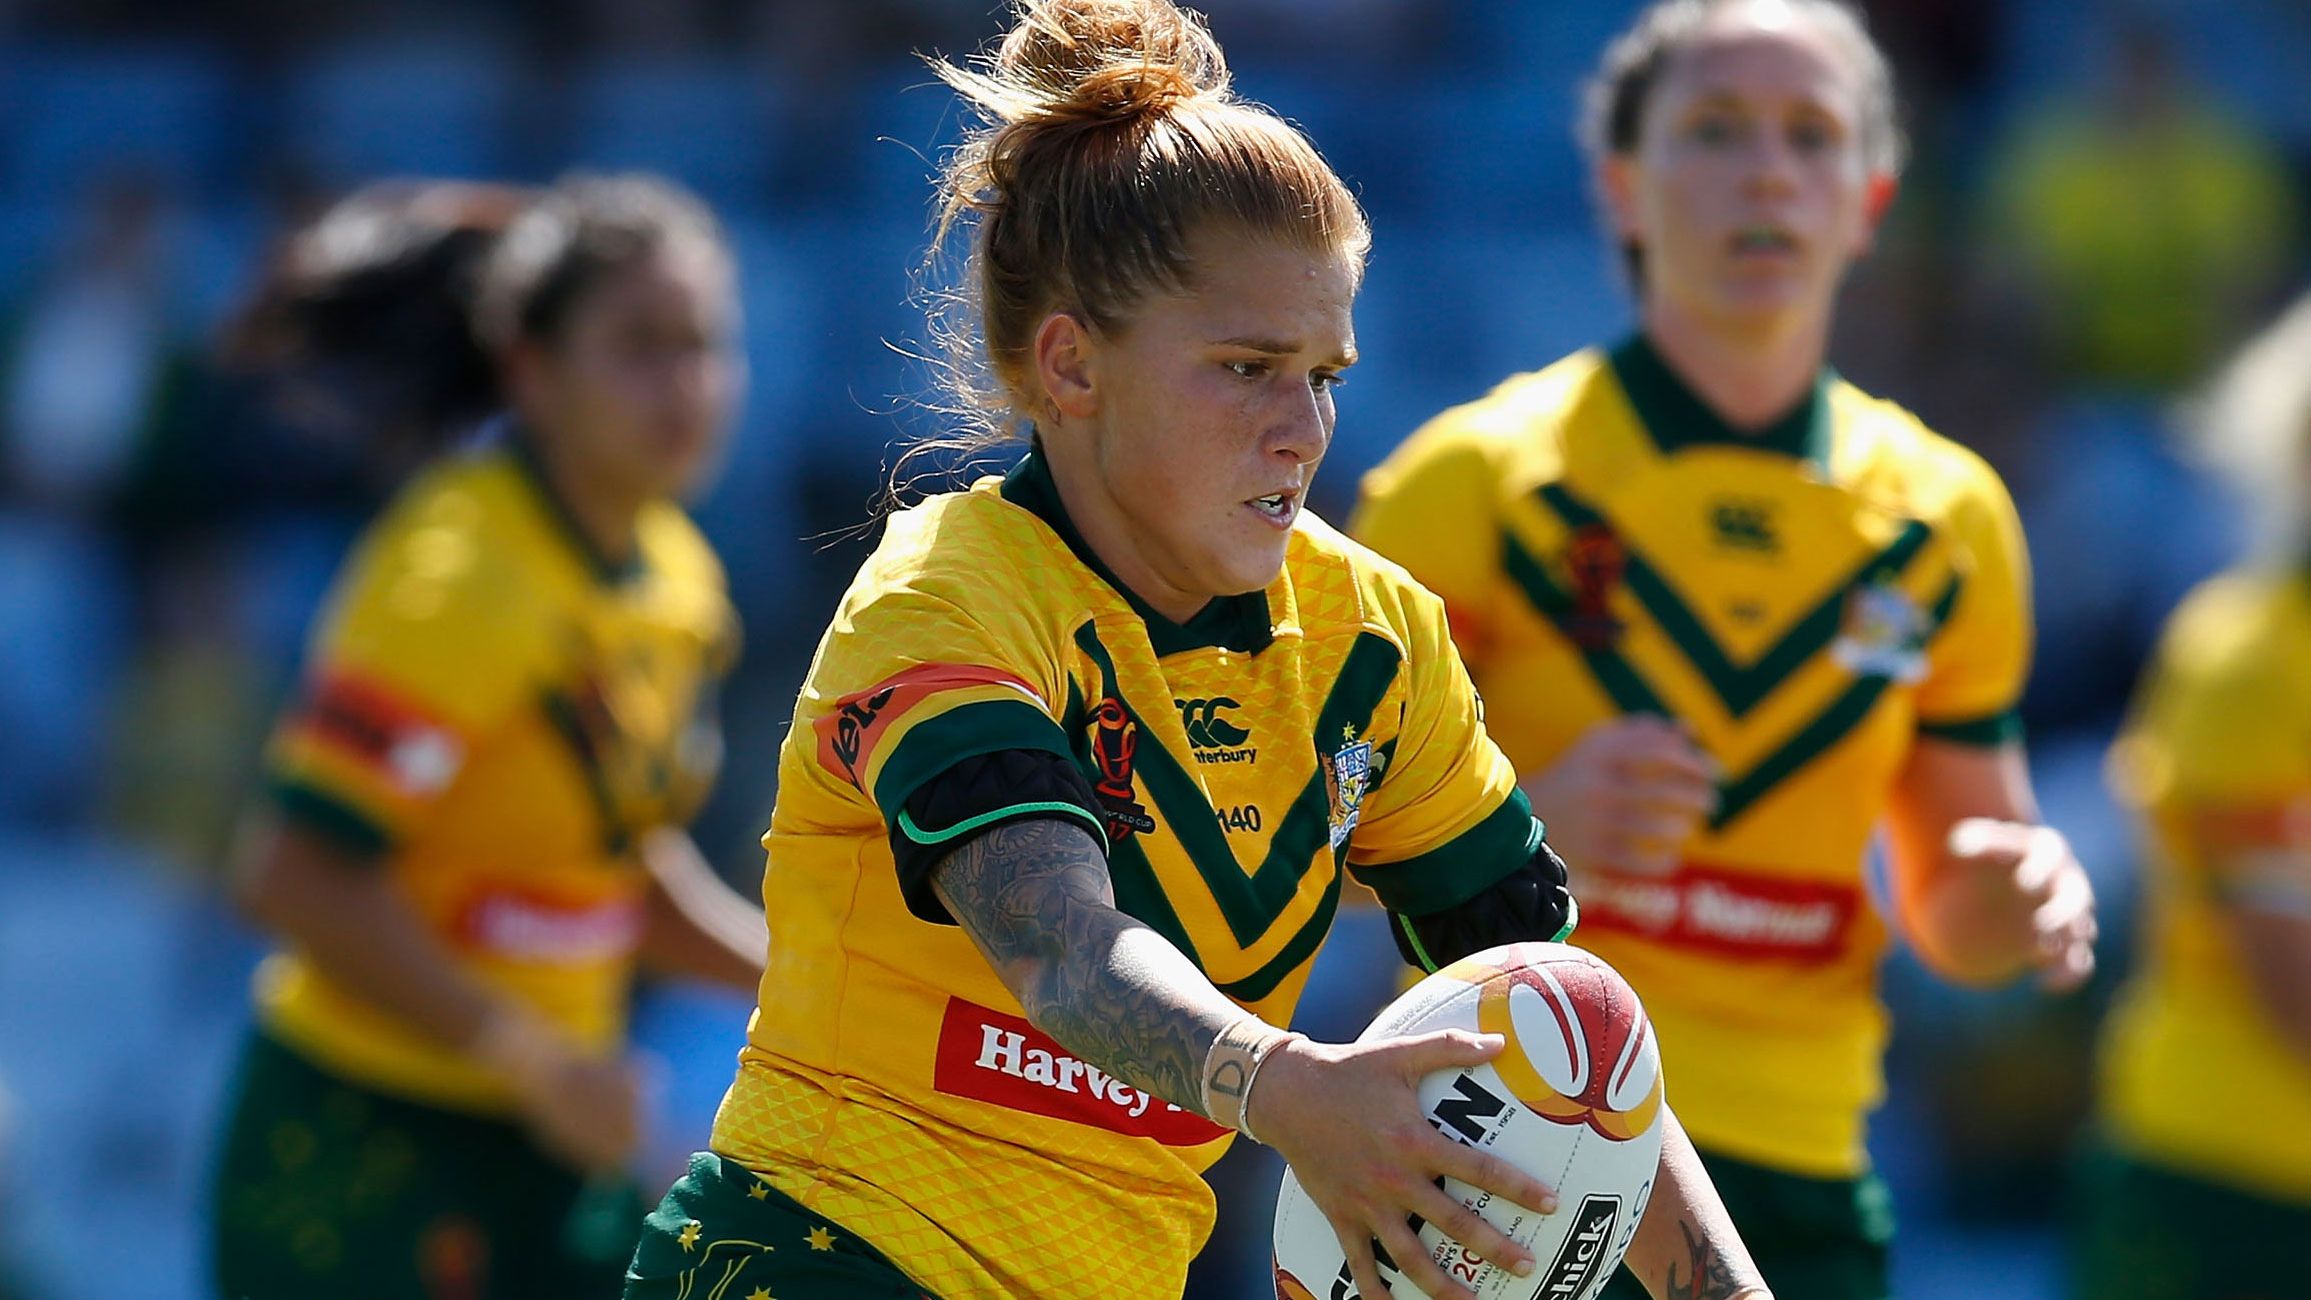 NRLW star banned for controversial social media post about Queen's death